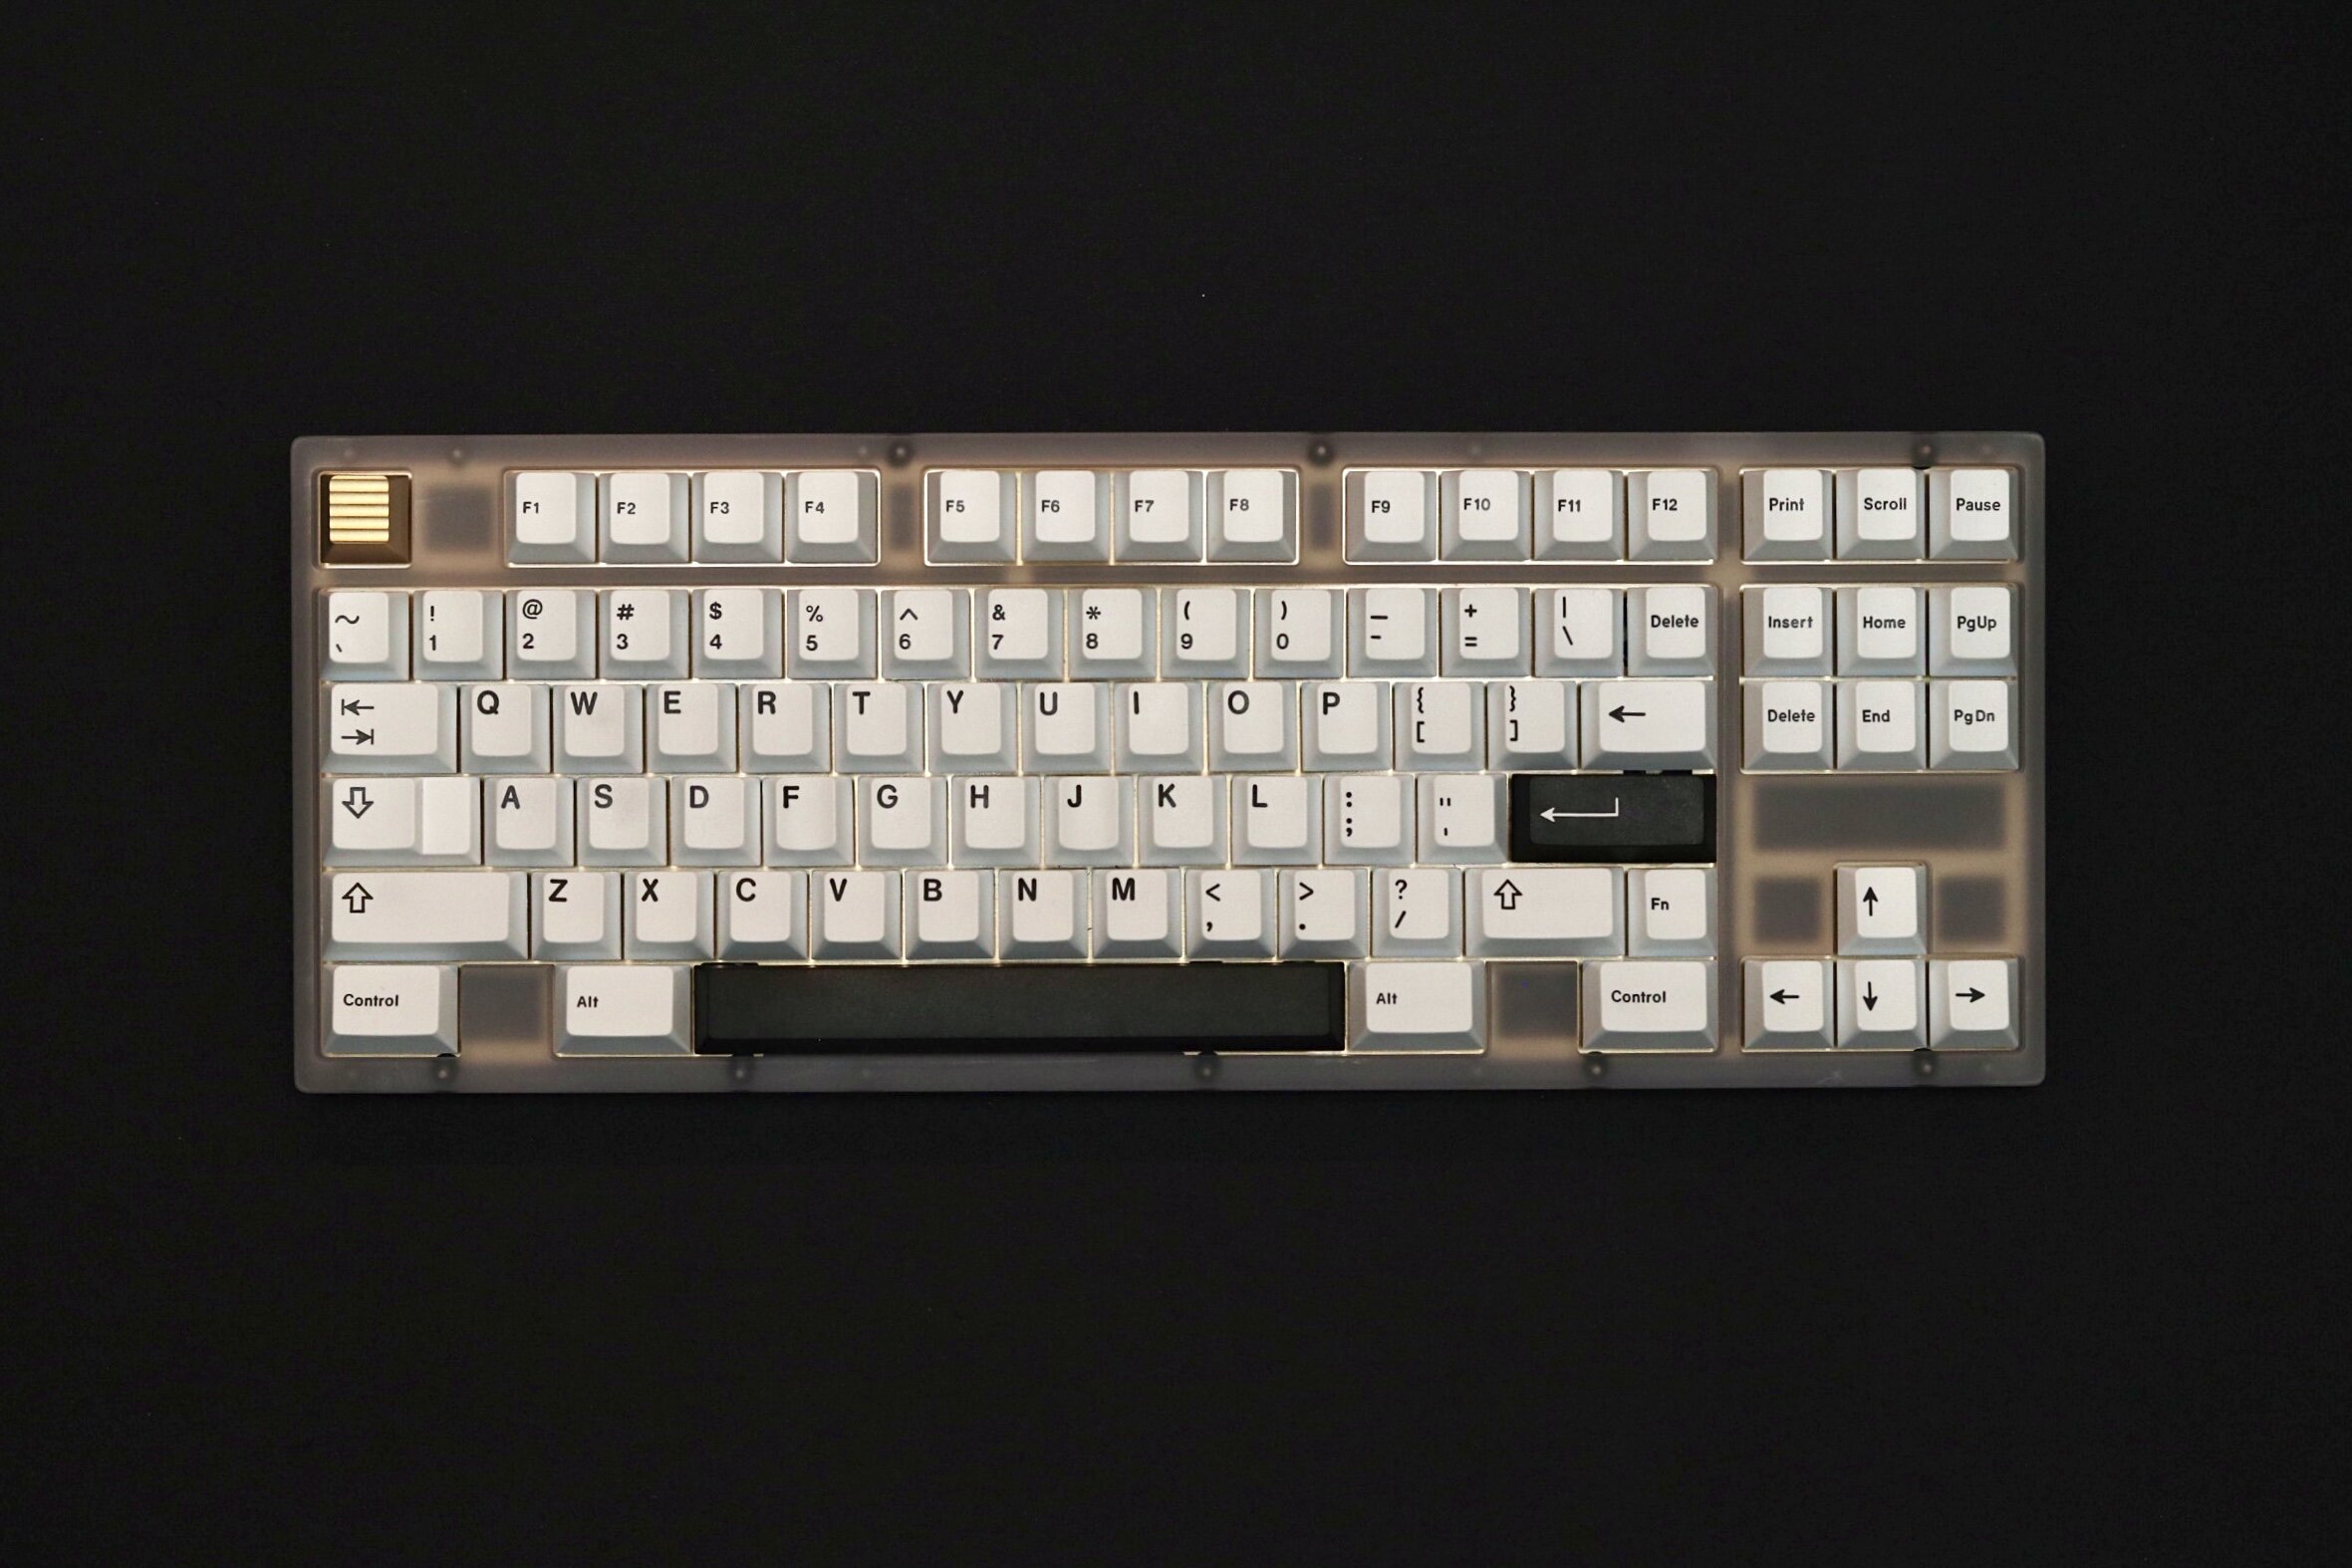 KBD8X MKII Review